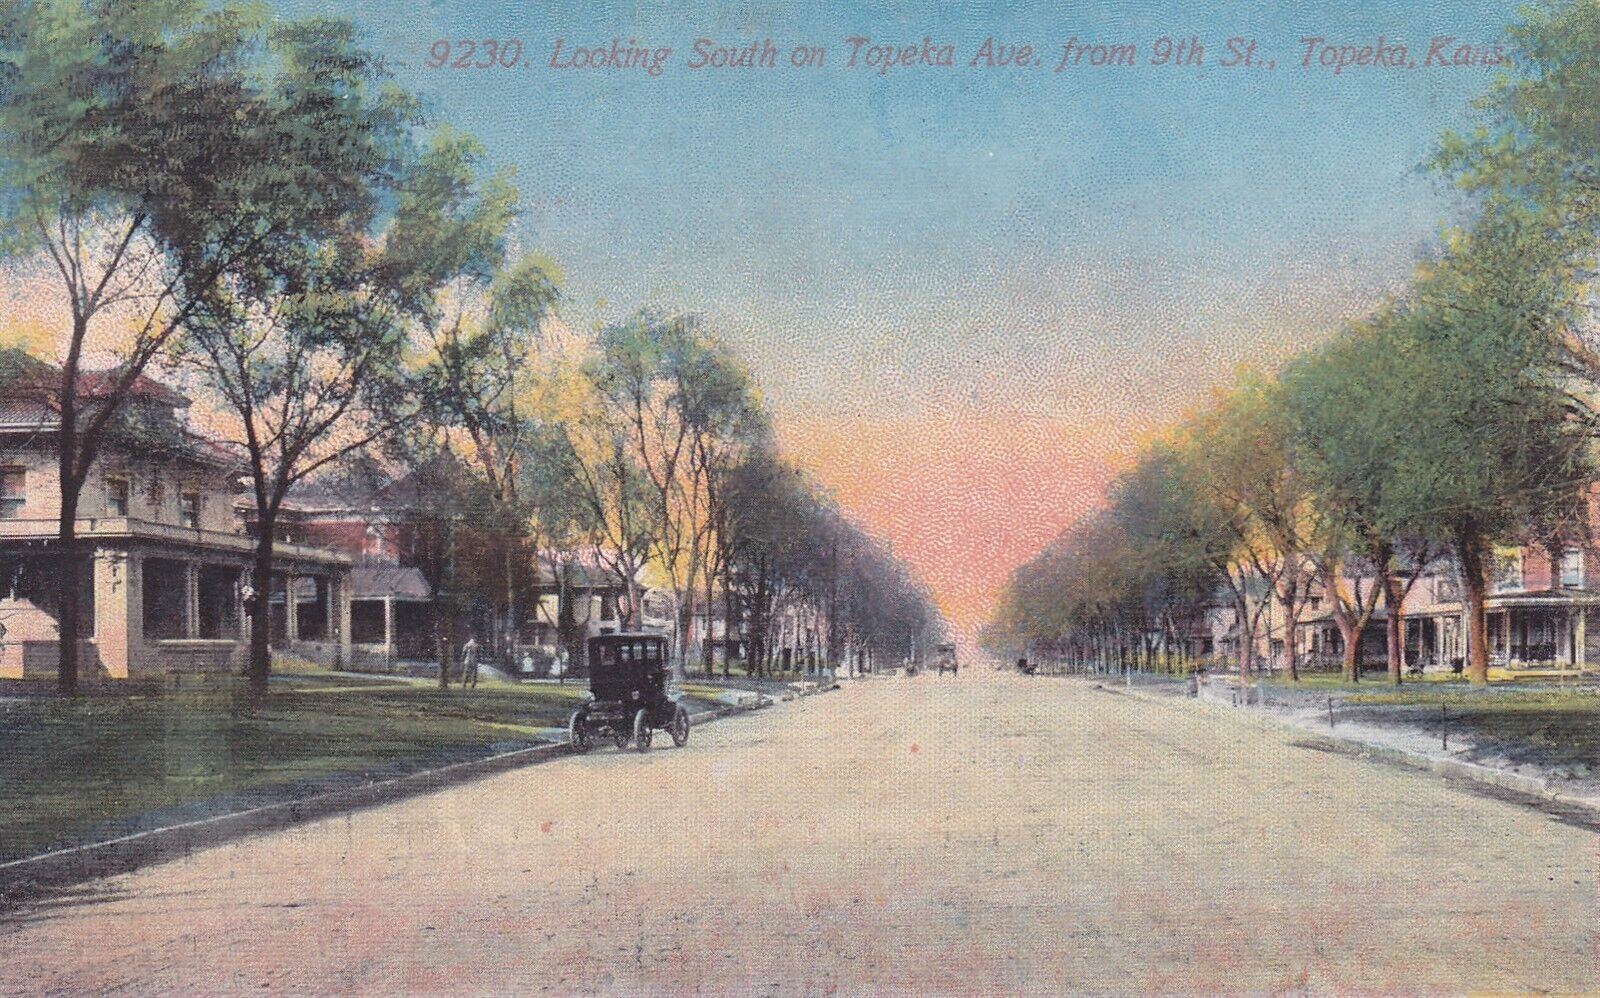 Topeka, KS - Looking South on Topeka Avenue from 9th St